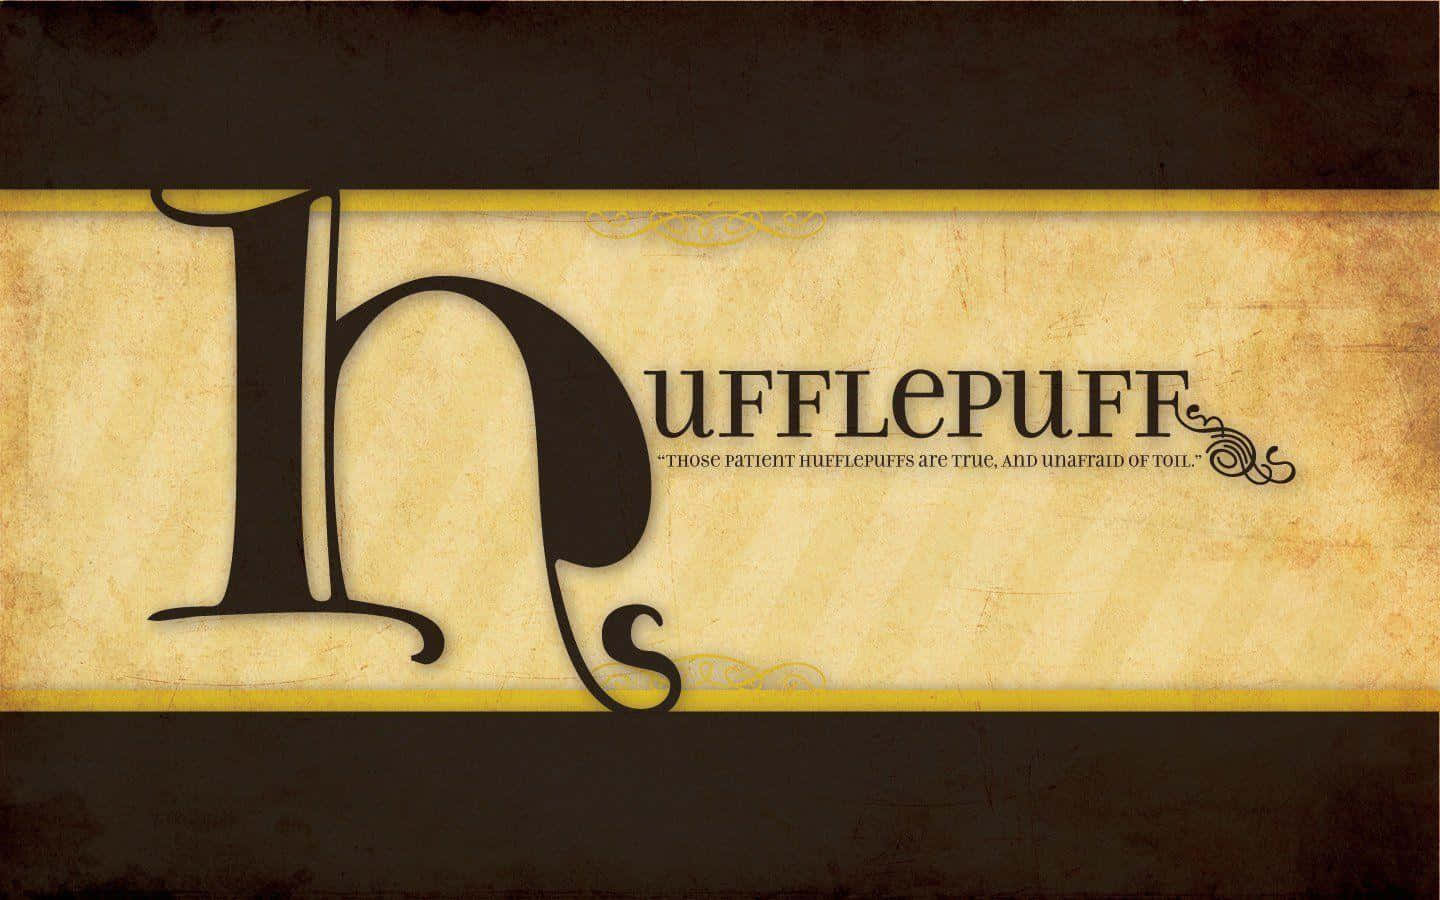 "A Warm Welcome to All Members of Hufflepuff!"